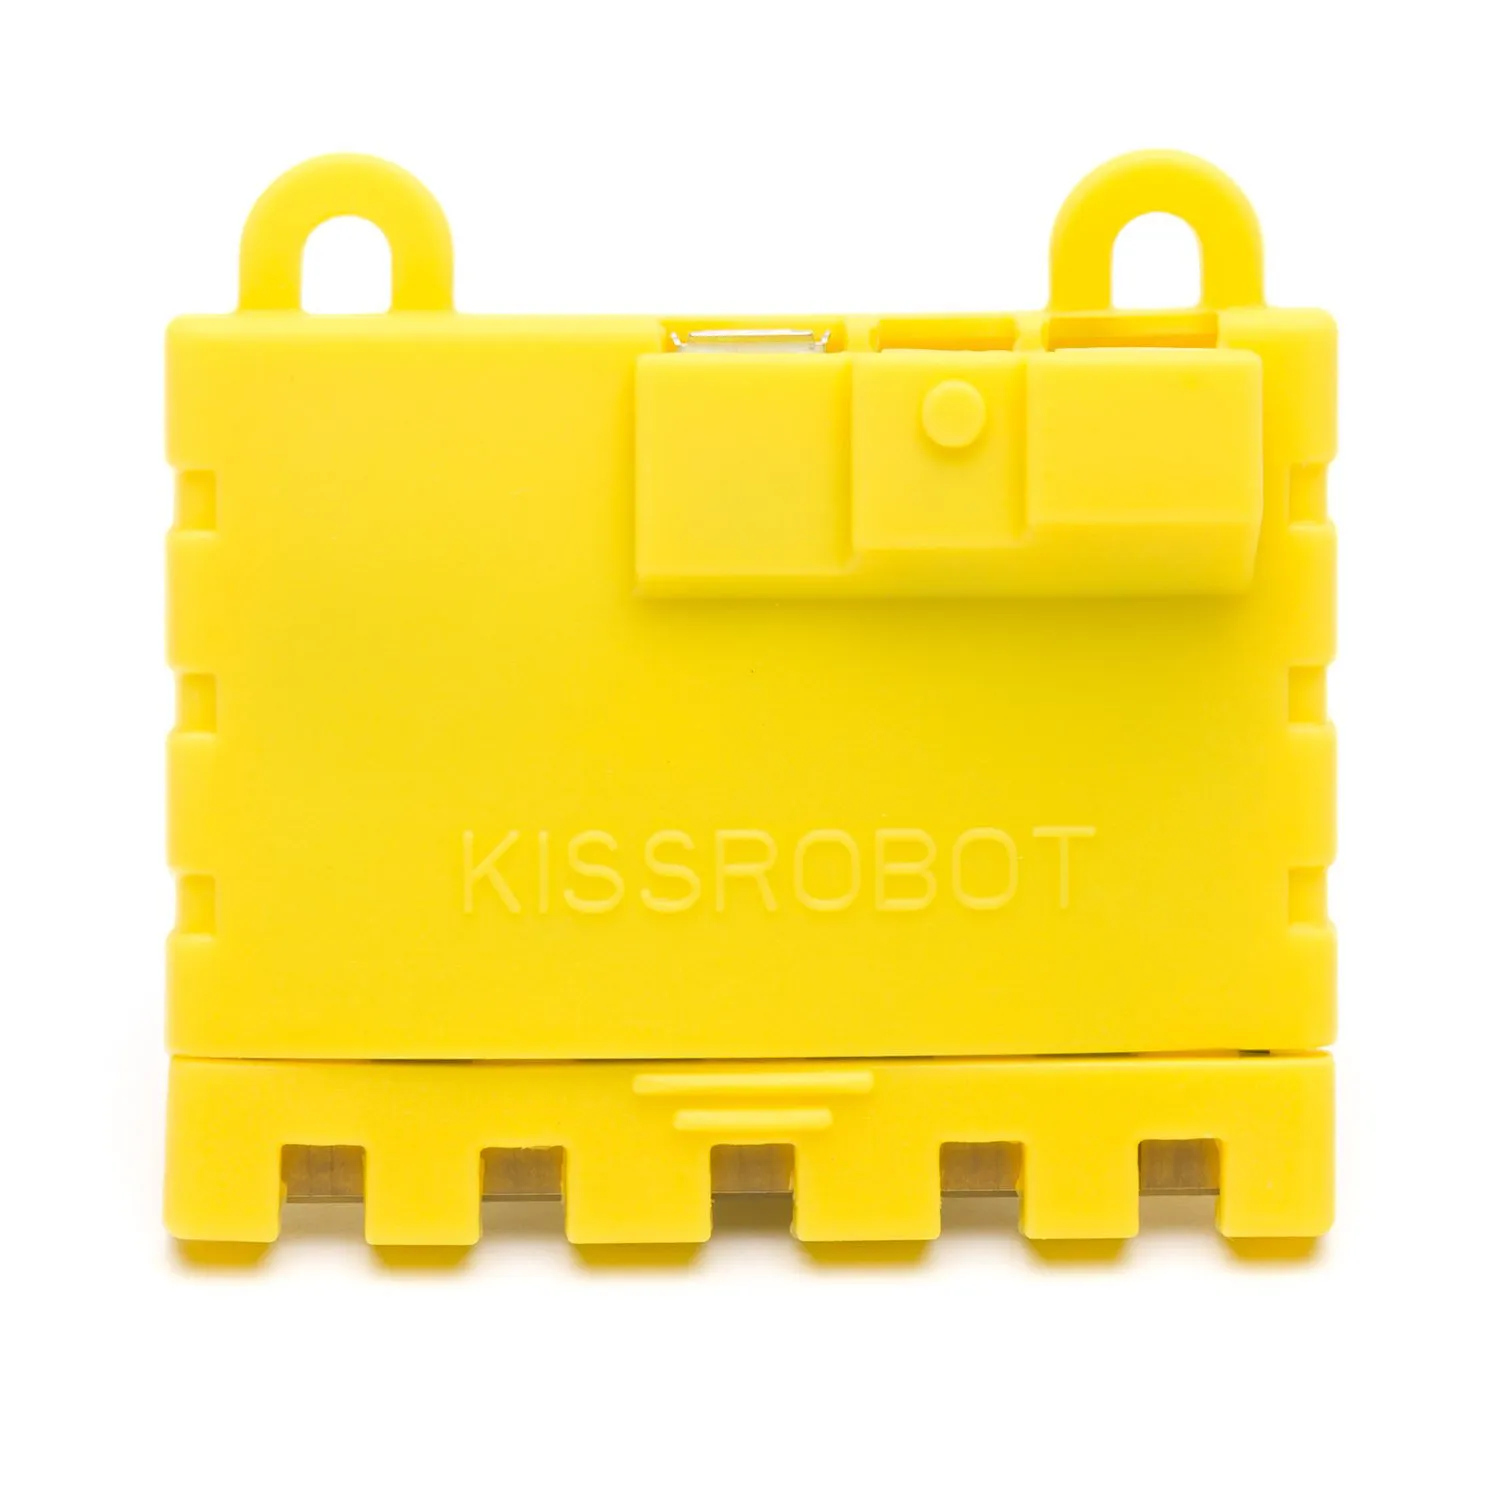 Photo of Micro:bit Rubber Case in Yellow